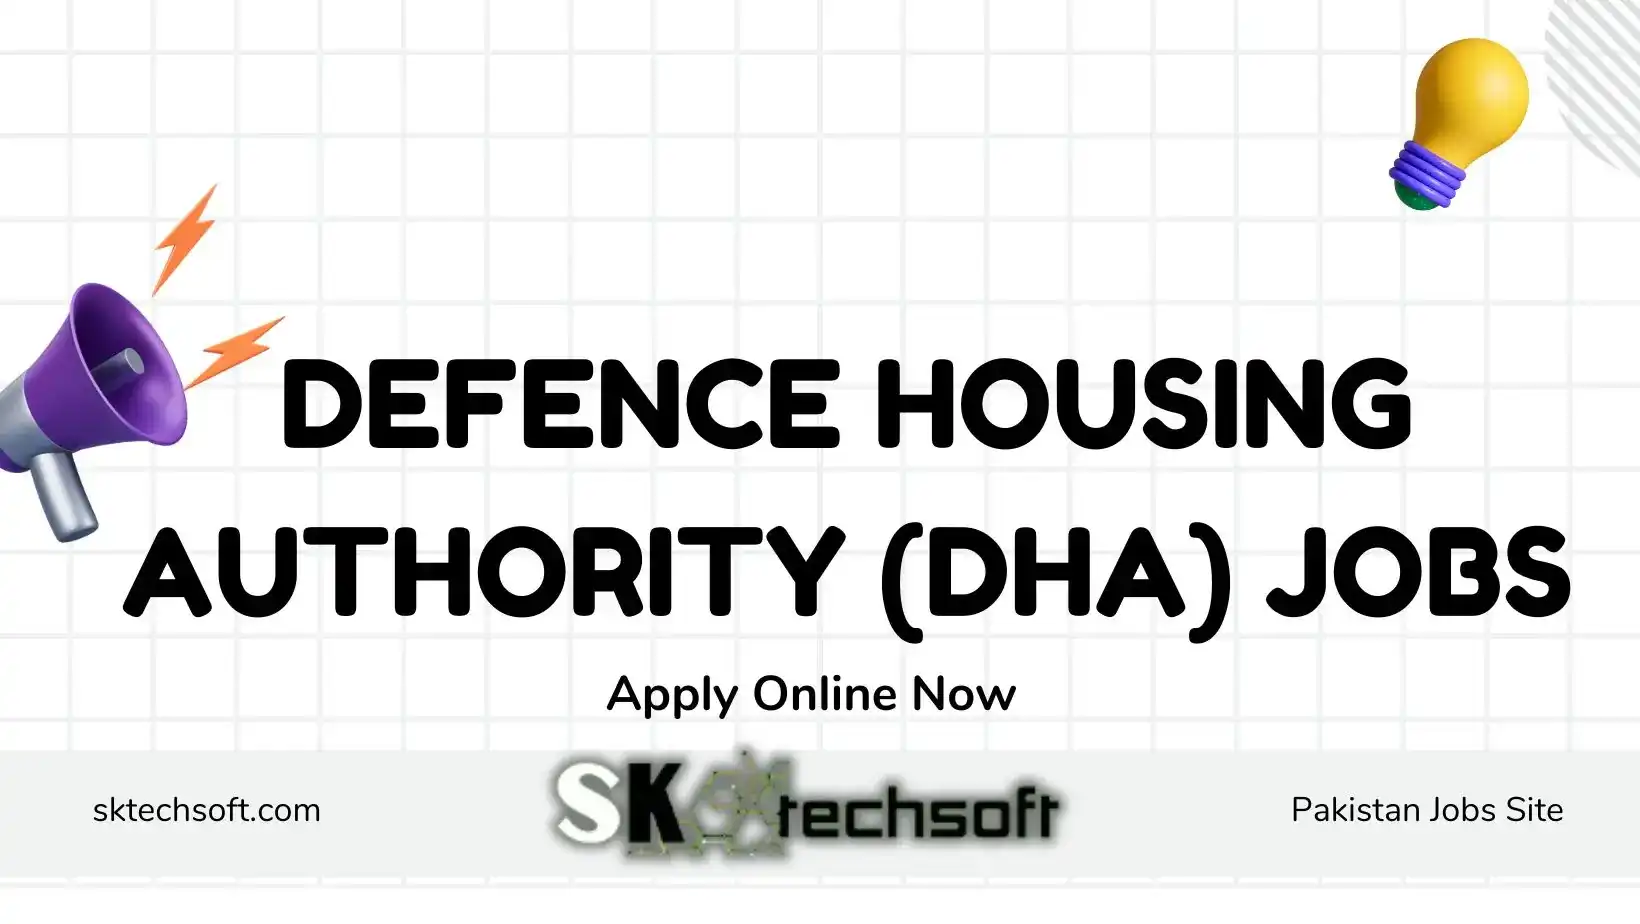 Defence Housing Authority (DHA) Jobs